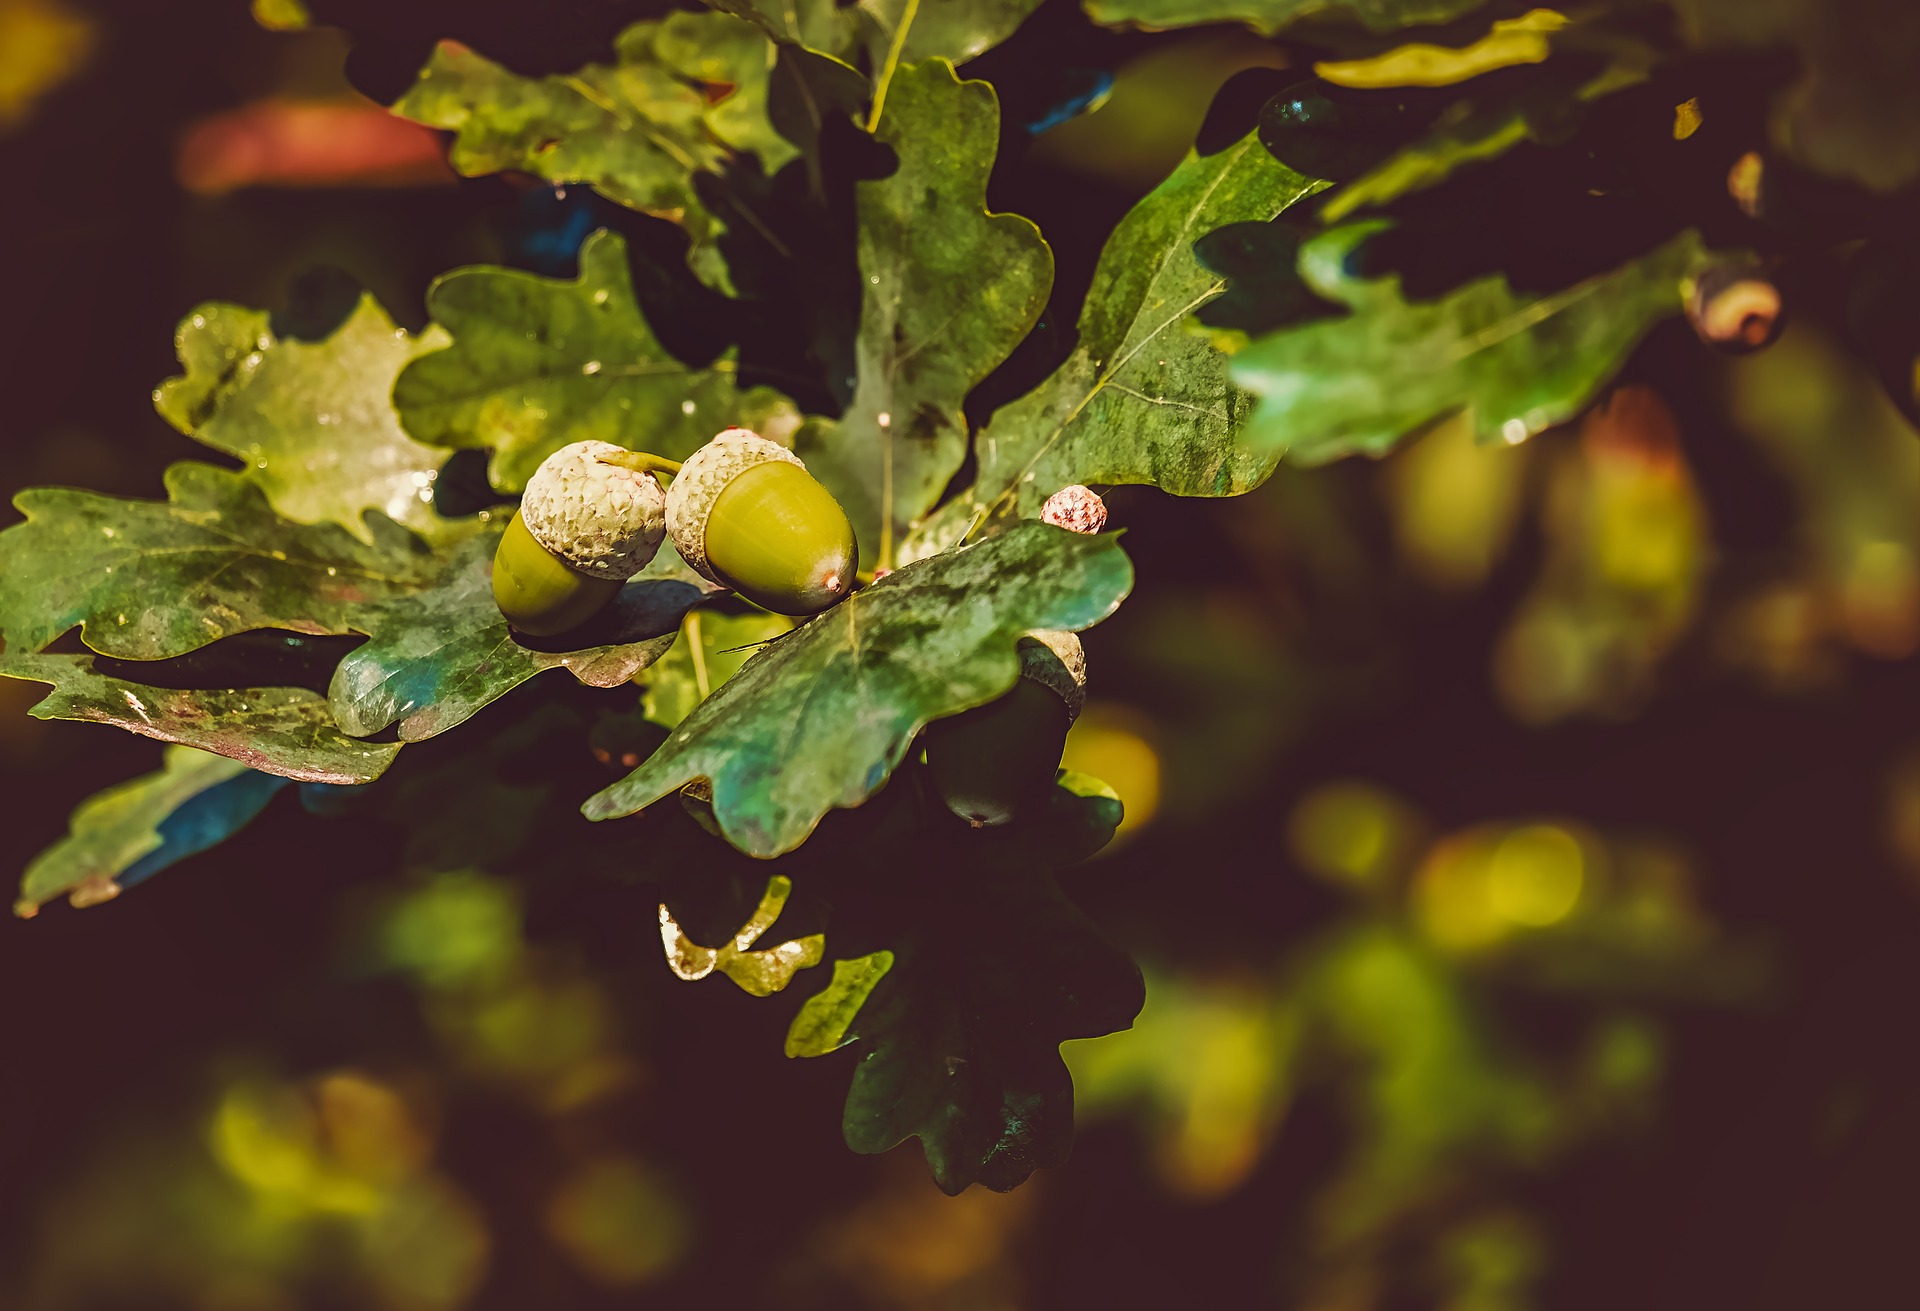 acorns are the easiest way to identify oak trees